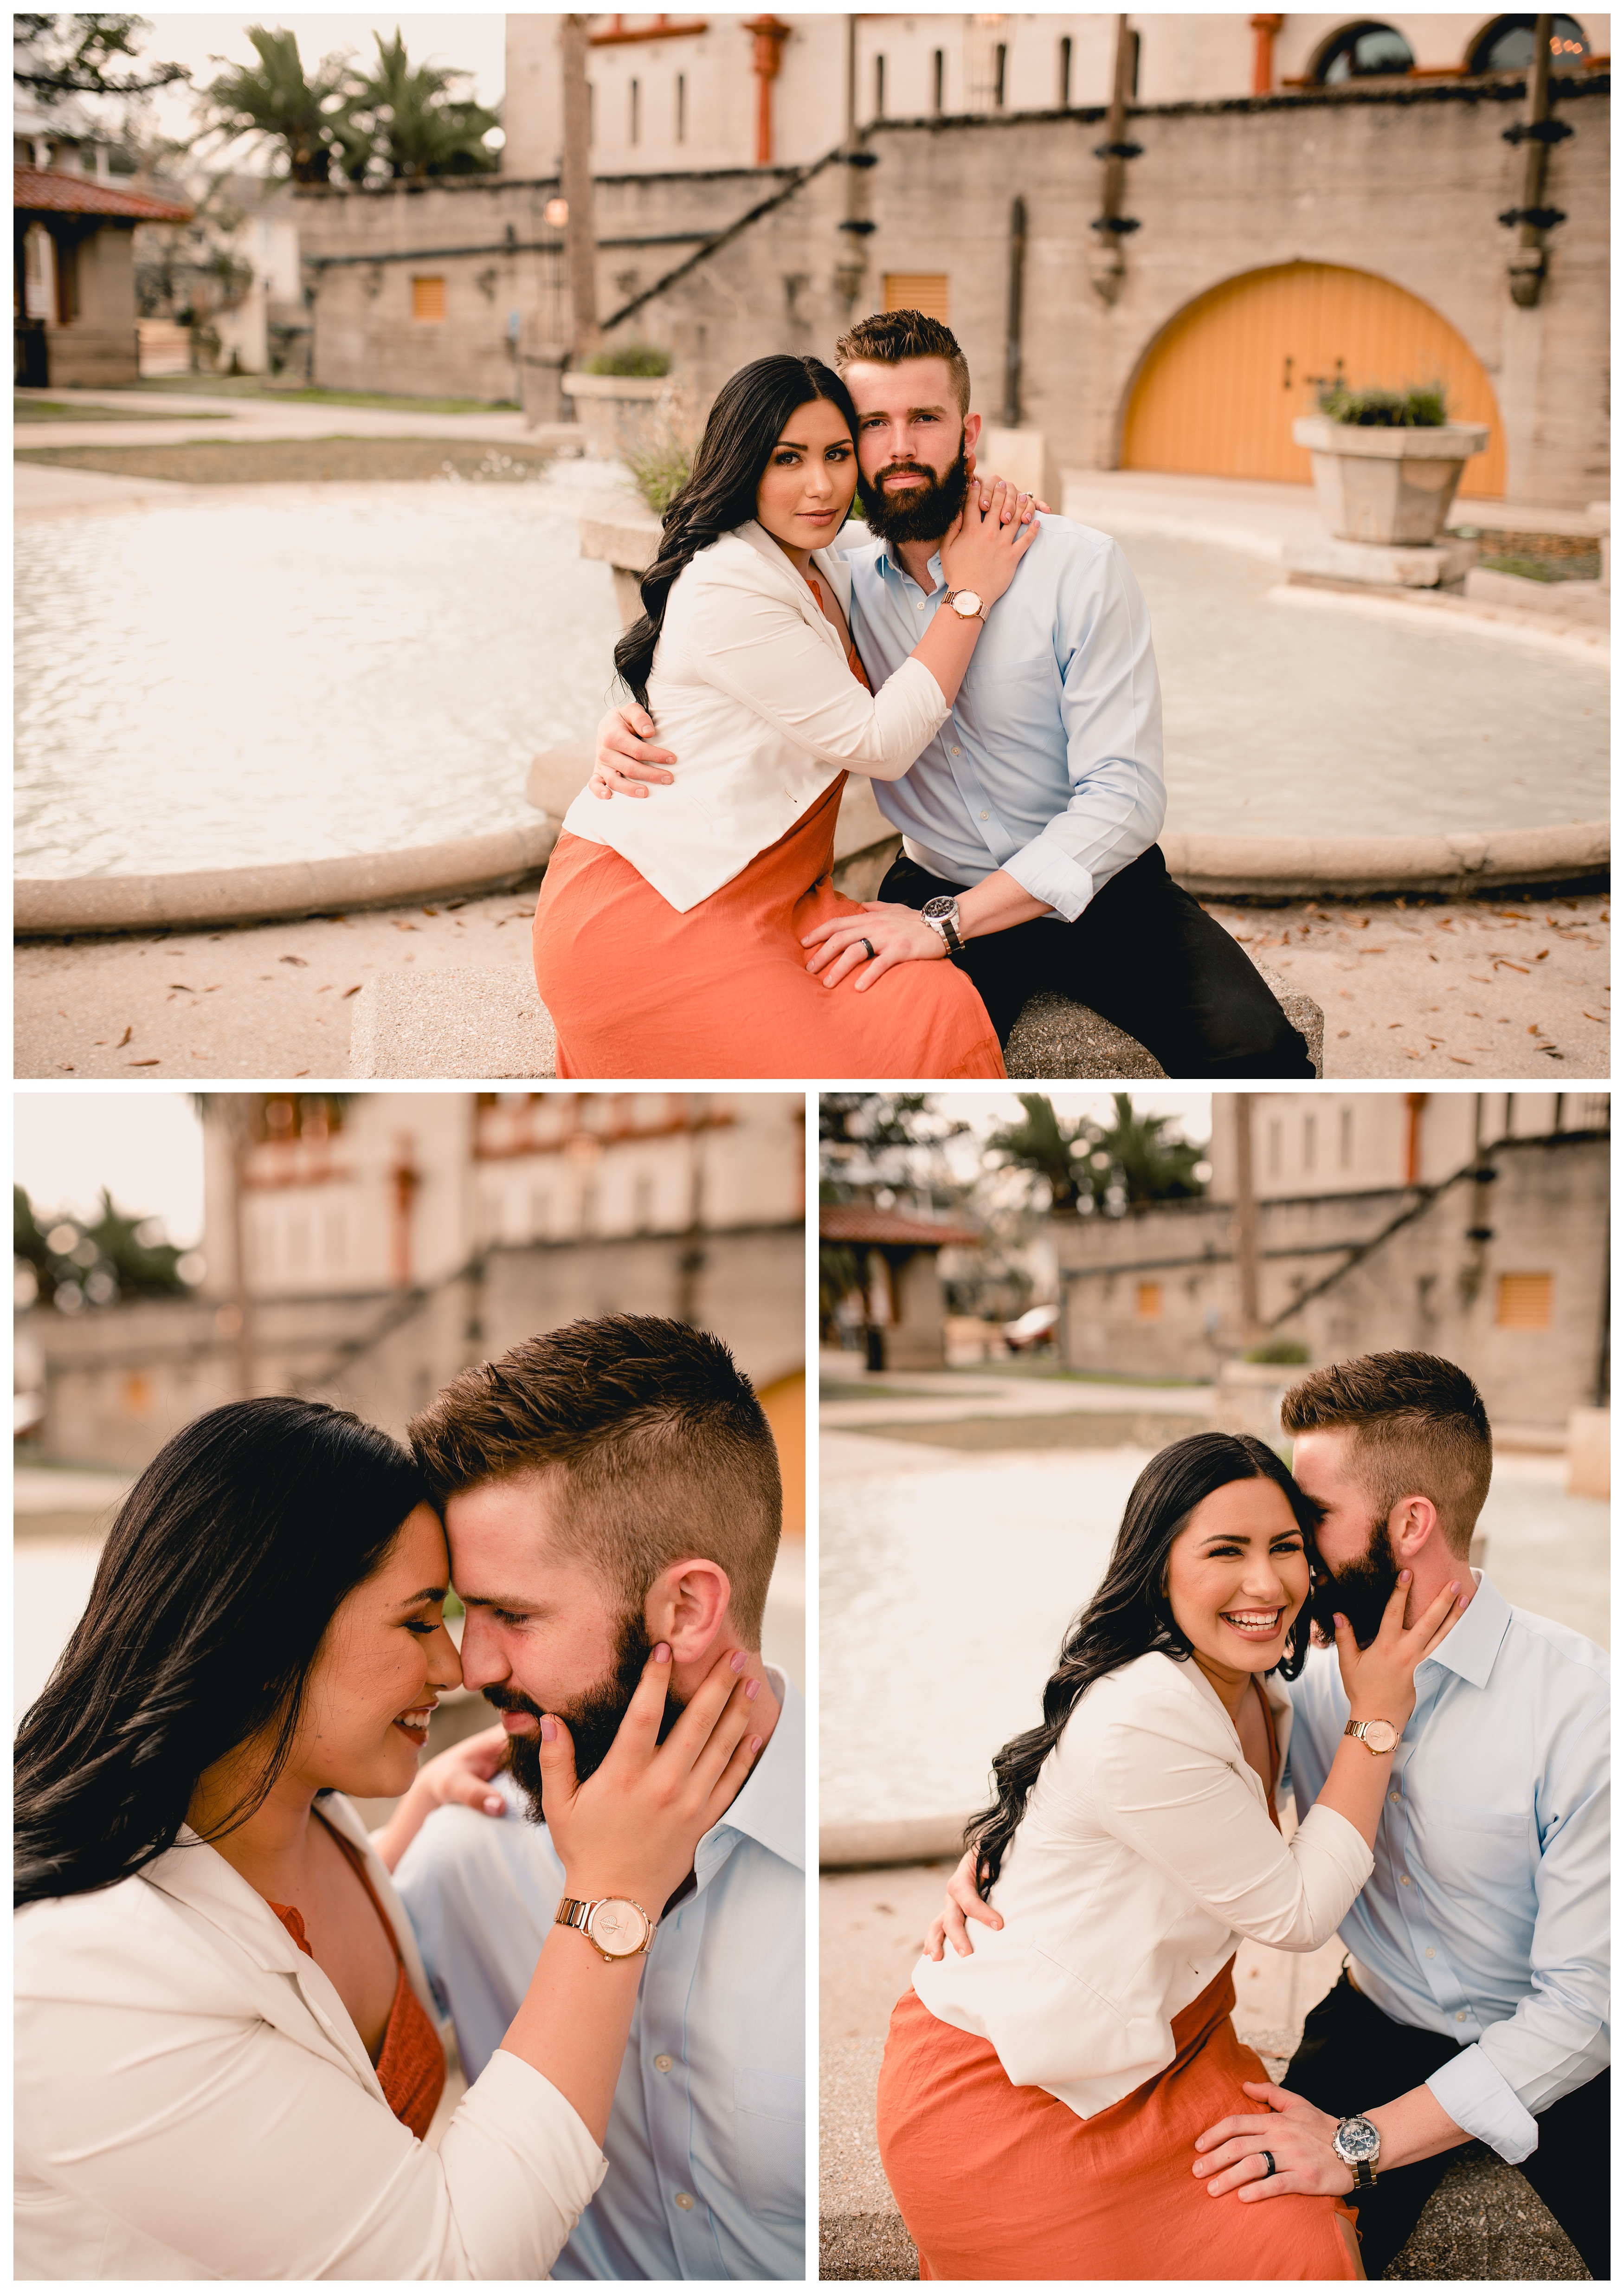 Intimate couples pictures taken by local professional photographer in St. Augustine. Shelly Williams Photography